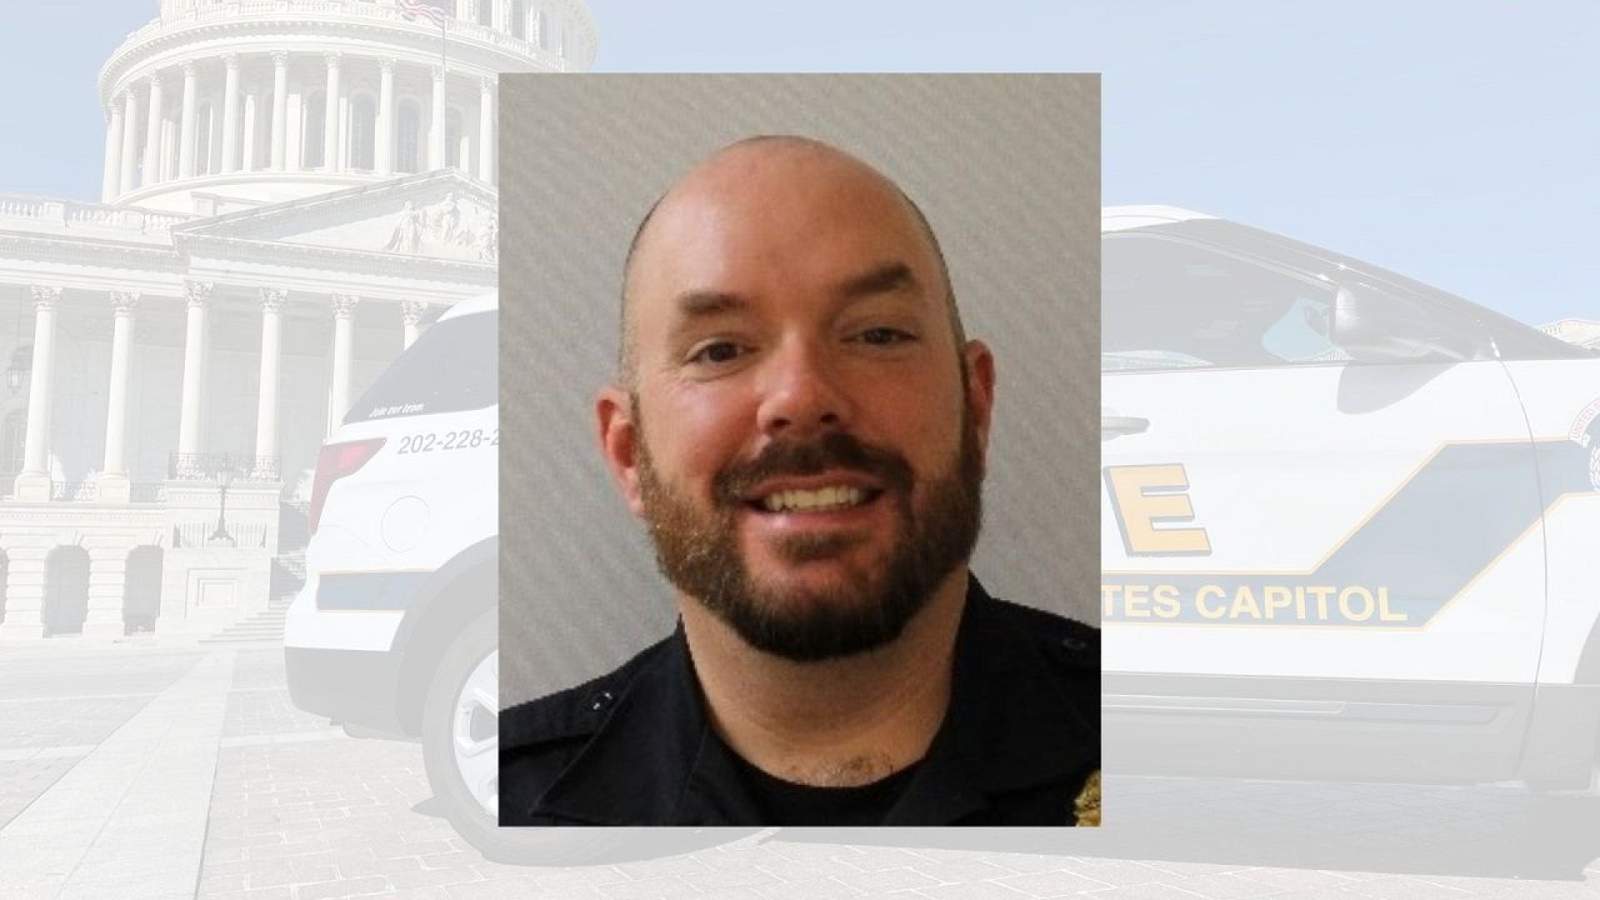 ‘We are heartbroken:’ Central Florida leaders react to news of Capitol officer’s death